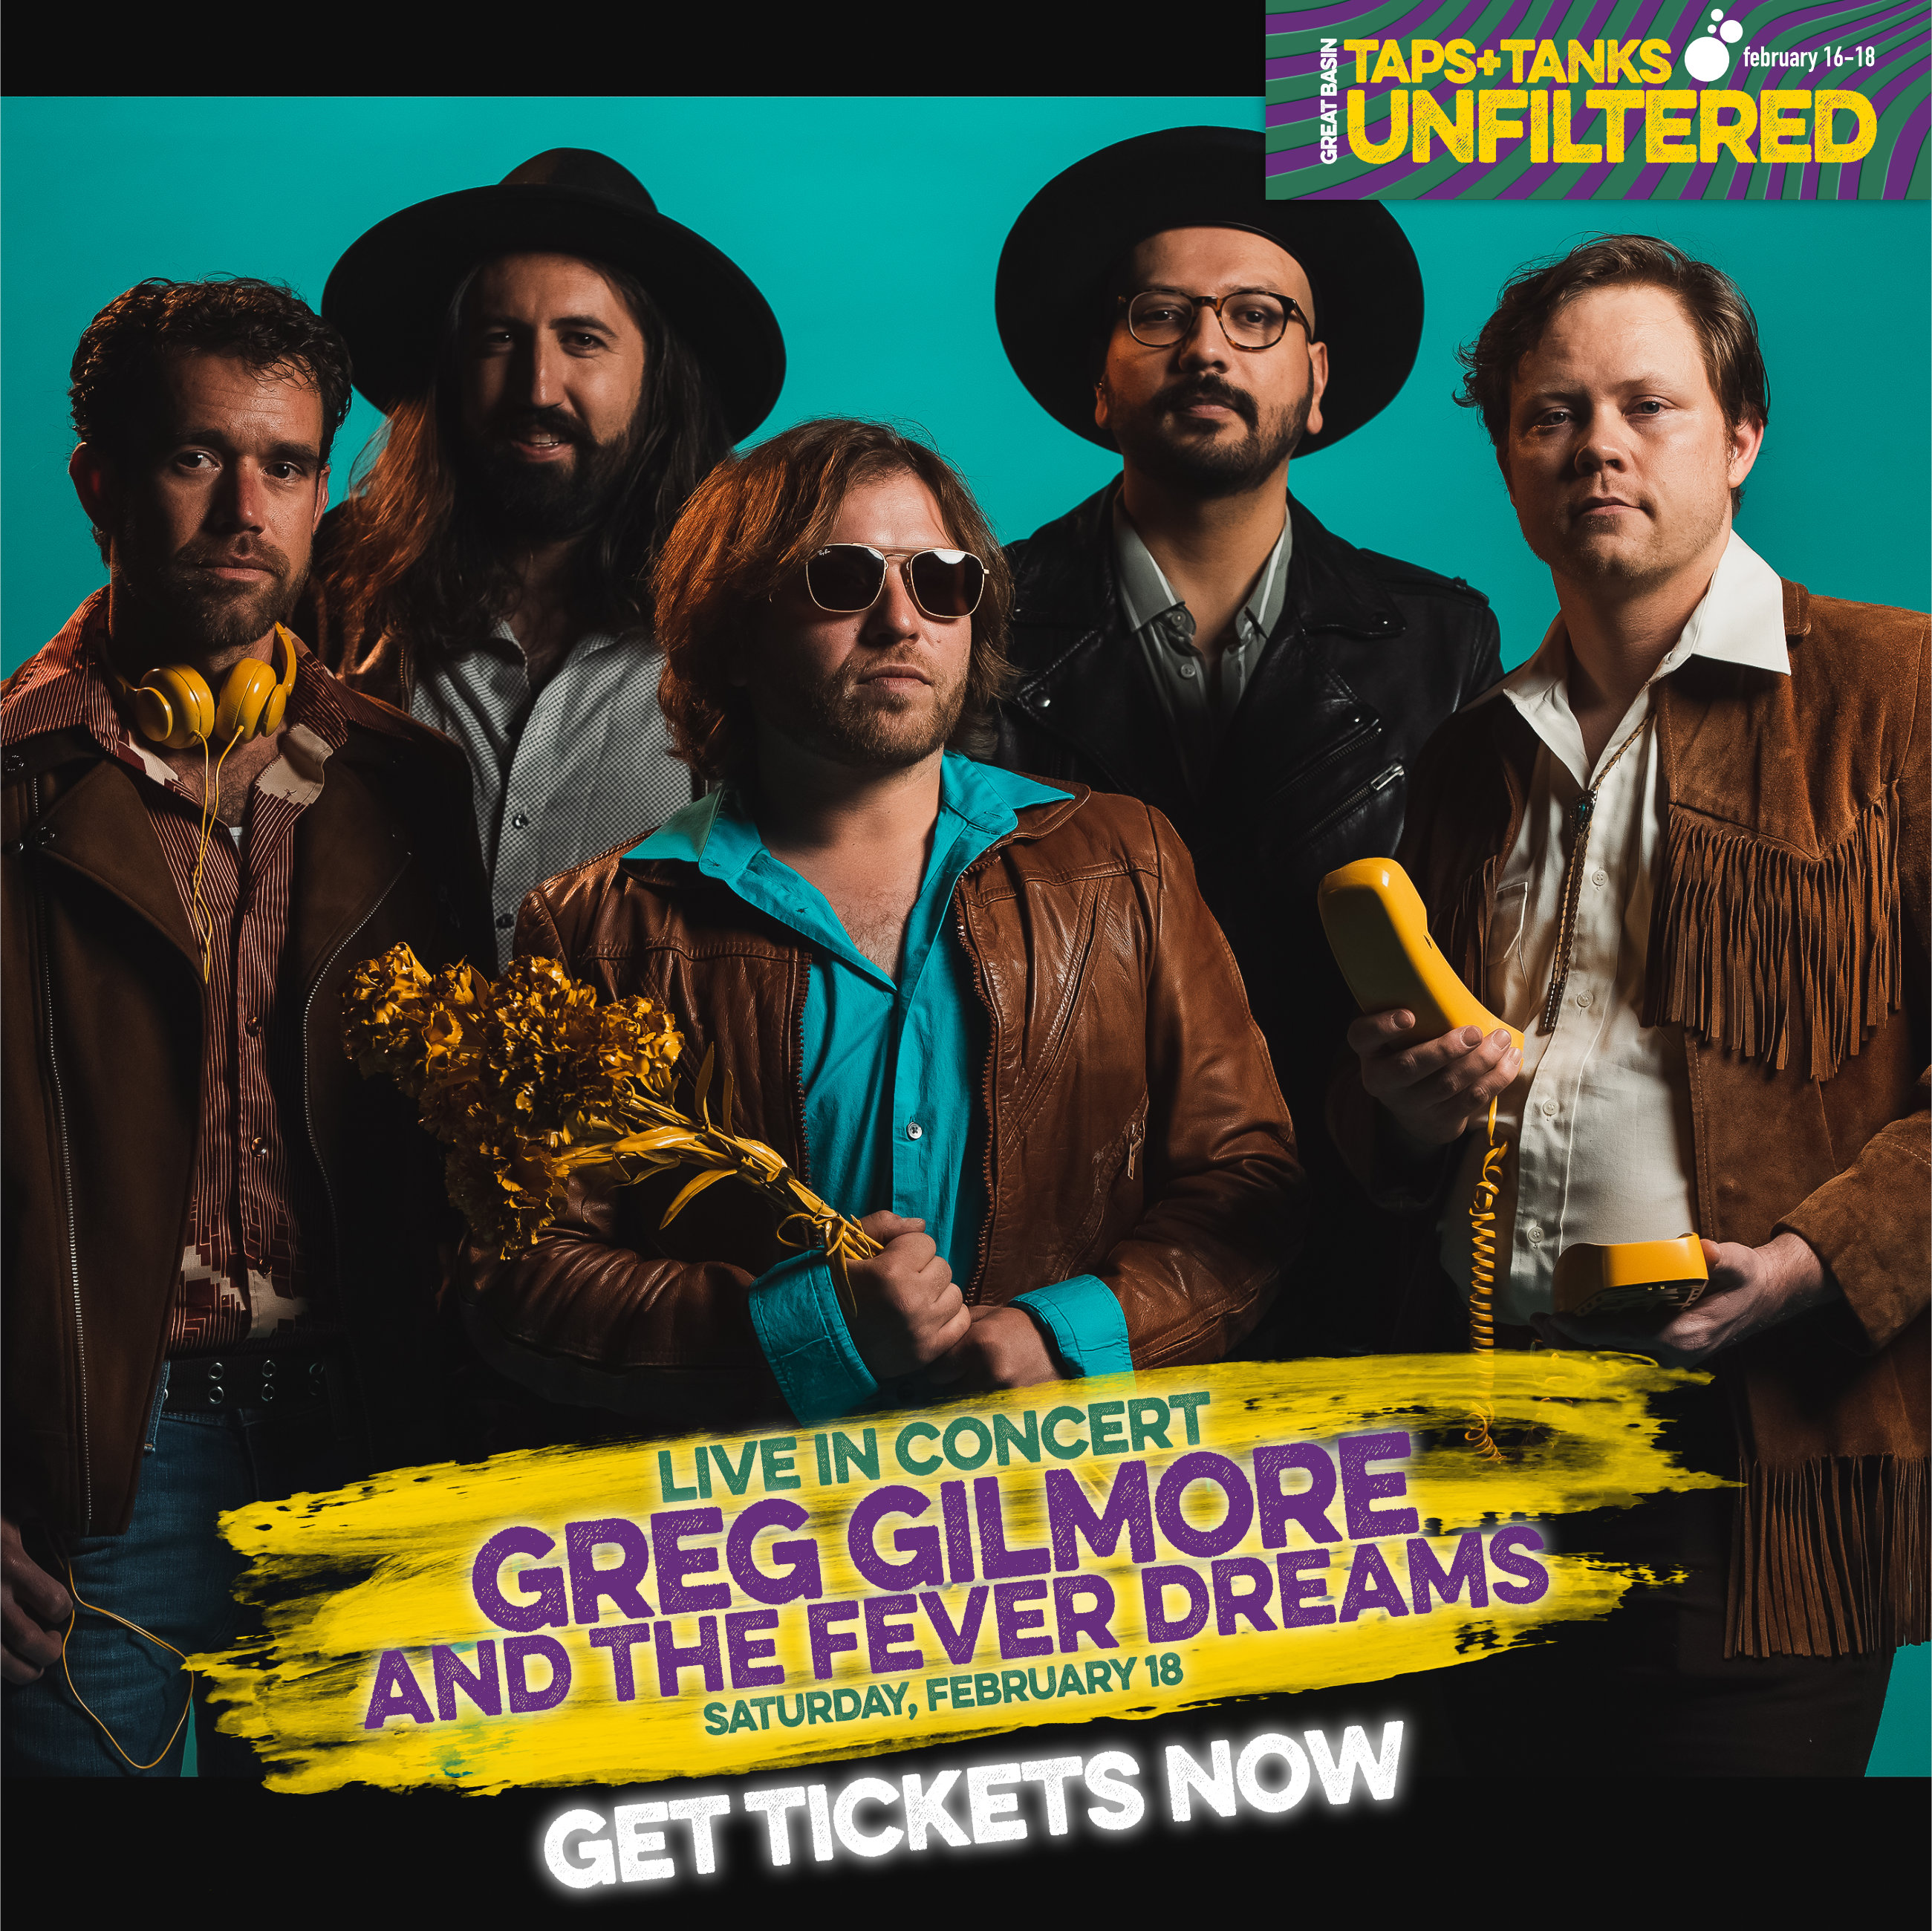 Greg Gilmore and the Fever Dreams Live In Concert - Get Tickets Today